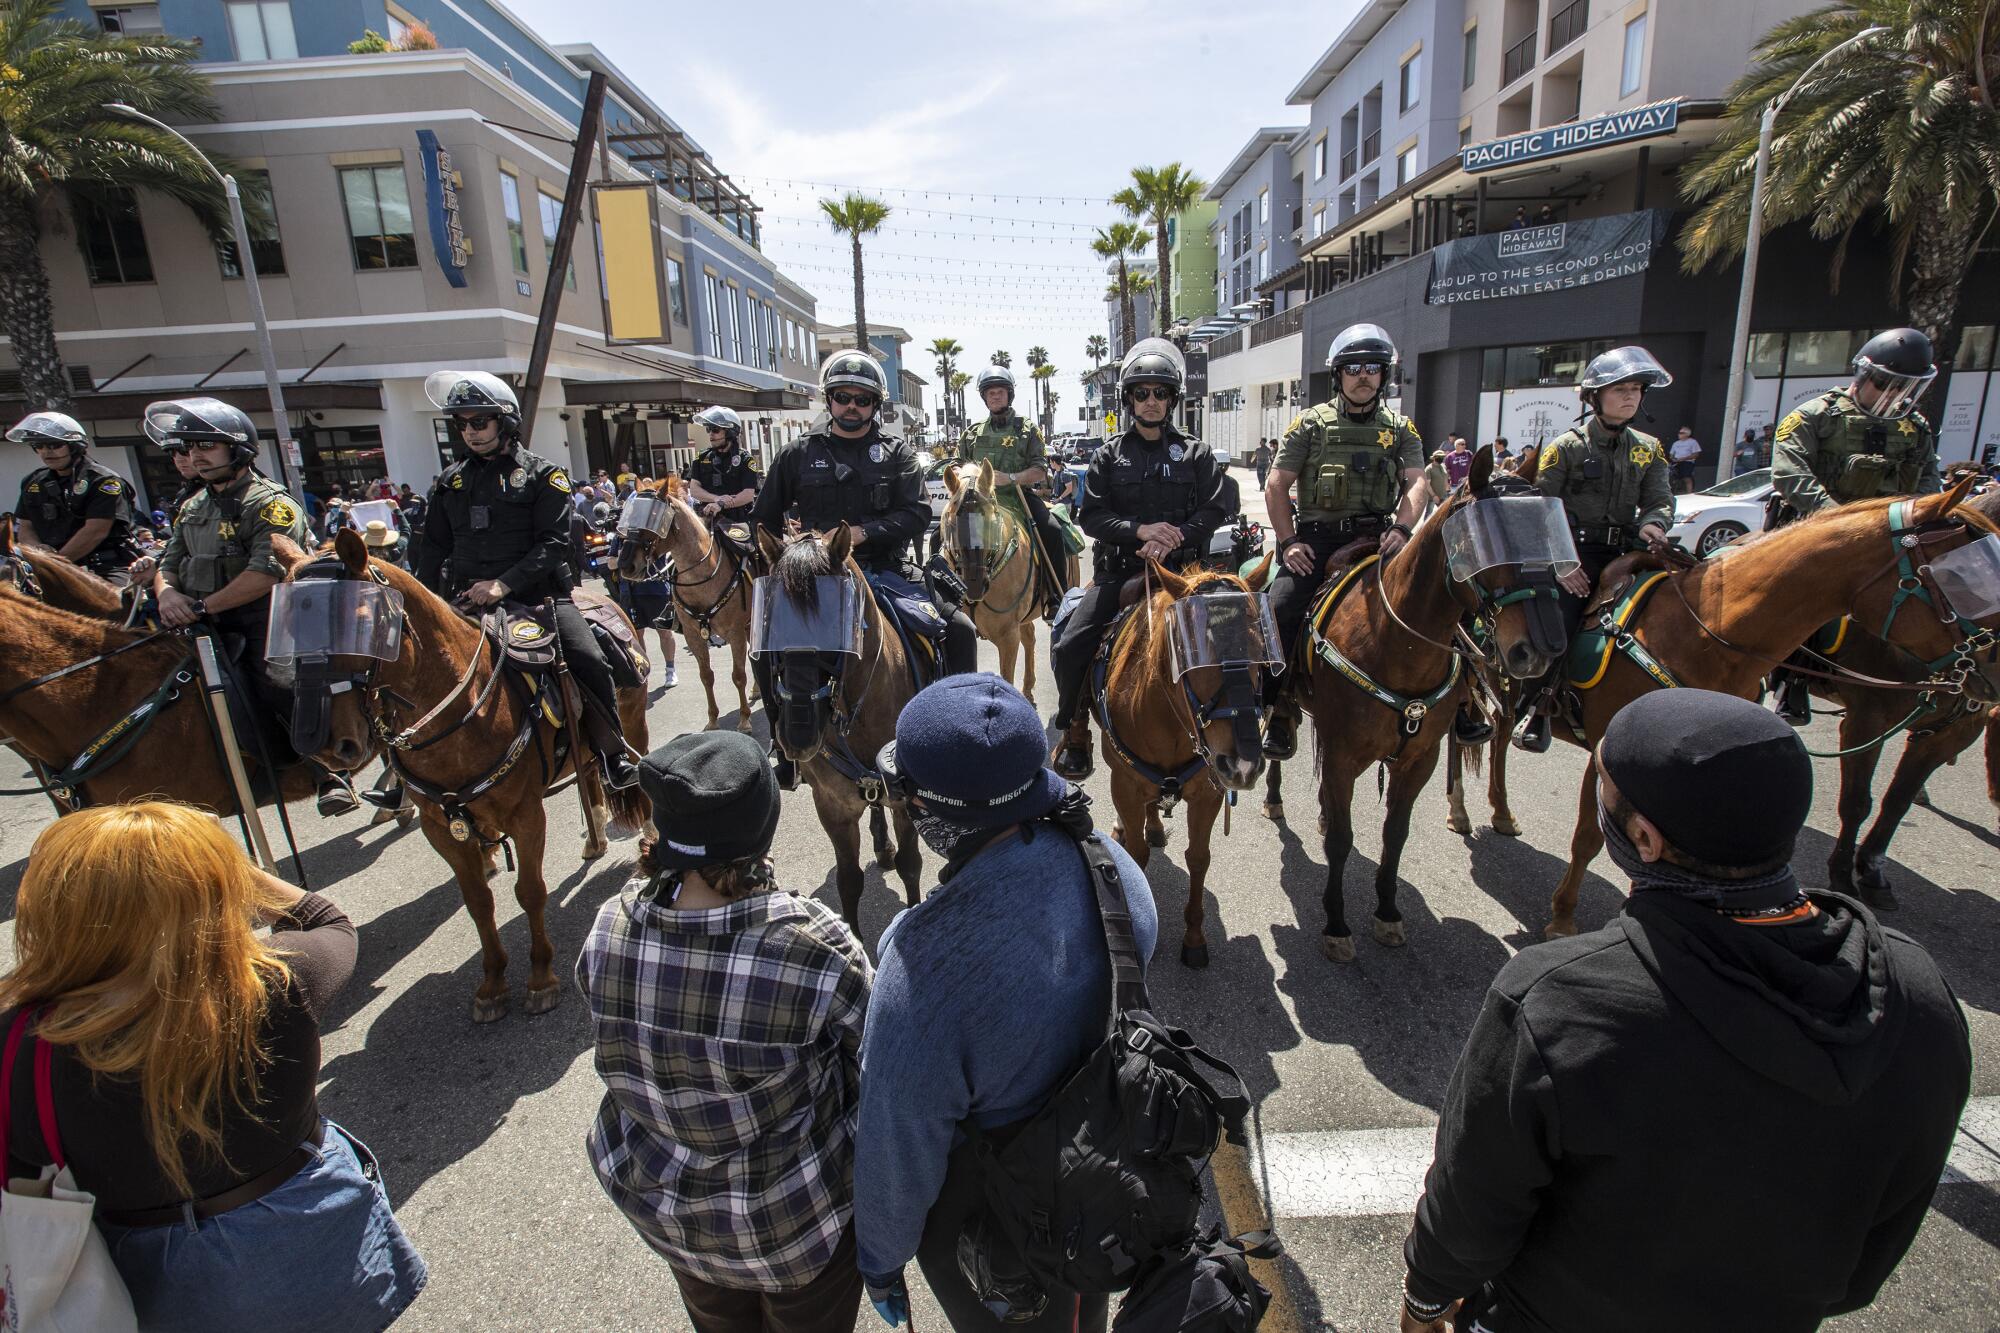 Protesters face a group of police officers on horseback